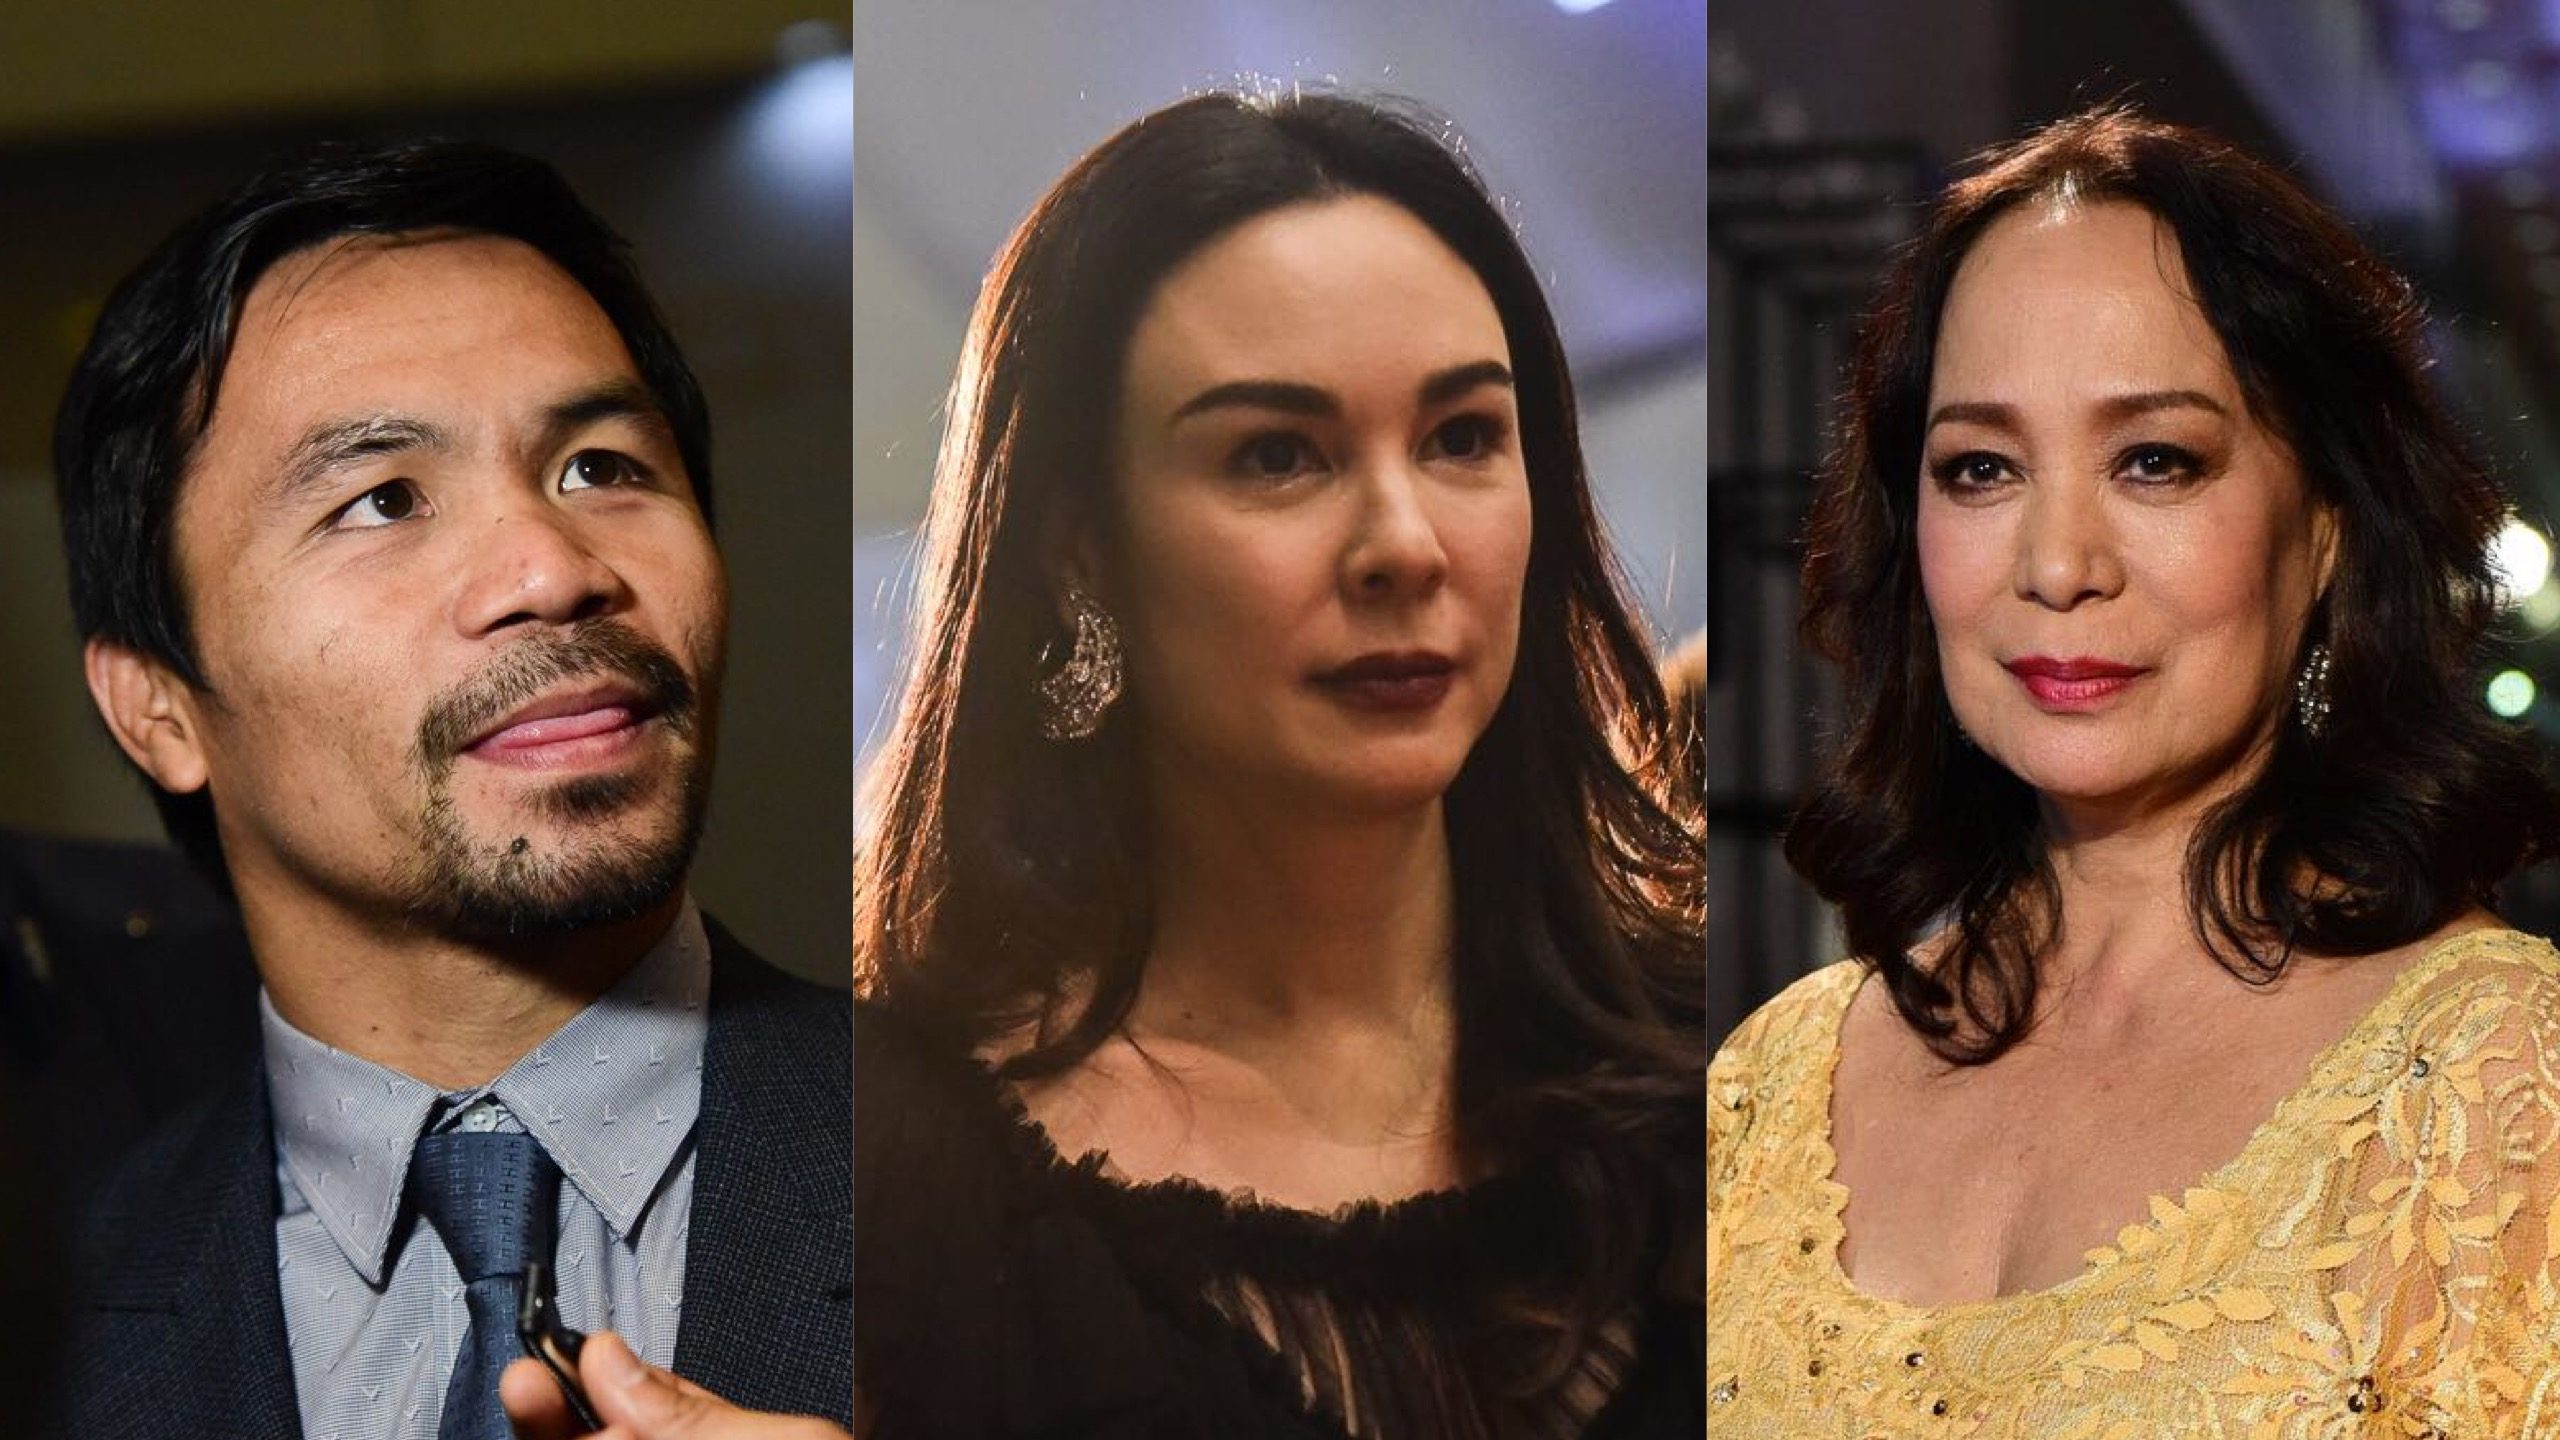 GOVERNOR'S BALL GUESTS. Manny Pacquiao, Gretchen Barretto, and Gloria Diaz were some of the guests at the Miss Universe 2016 Governor's Ball. All photos by Alecs Ongcal/Rappler 